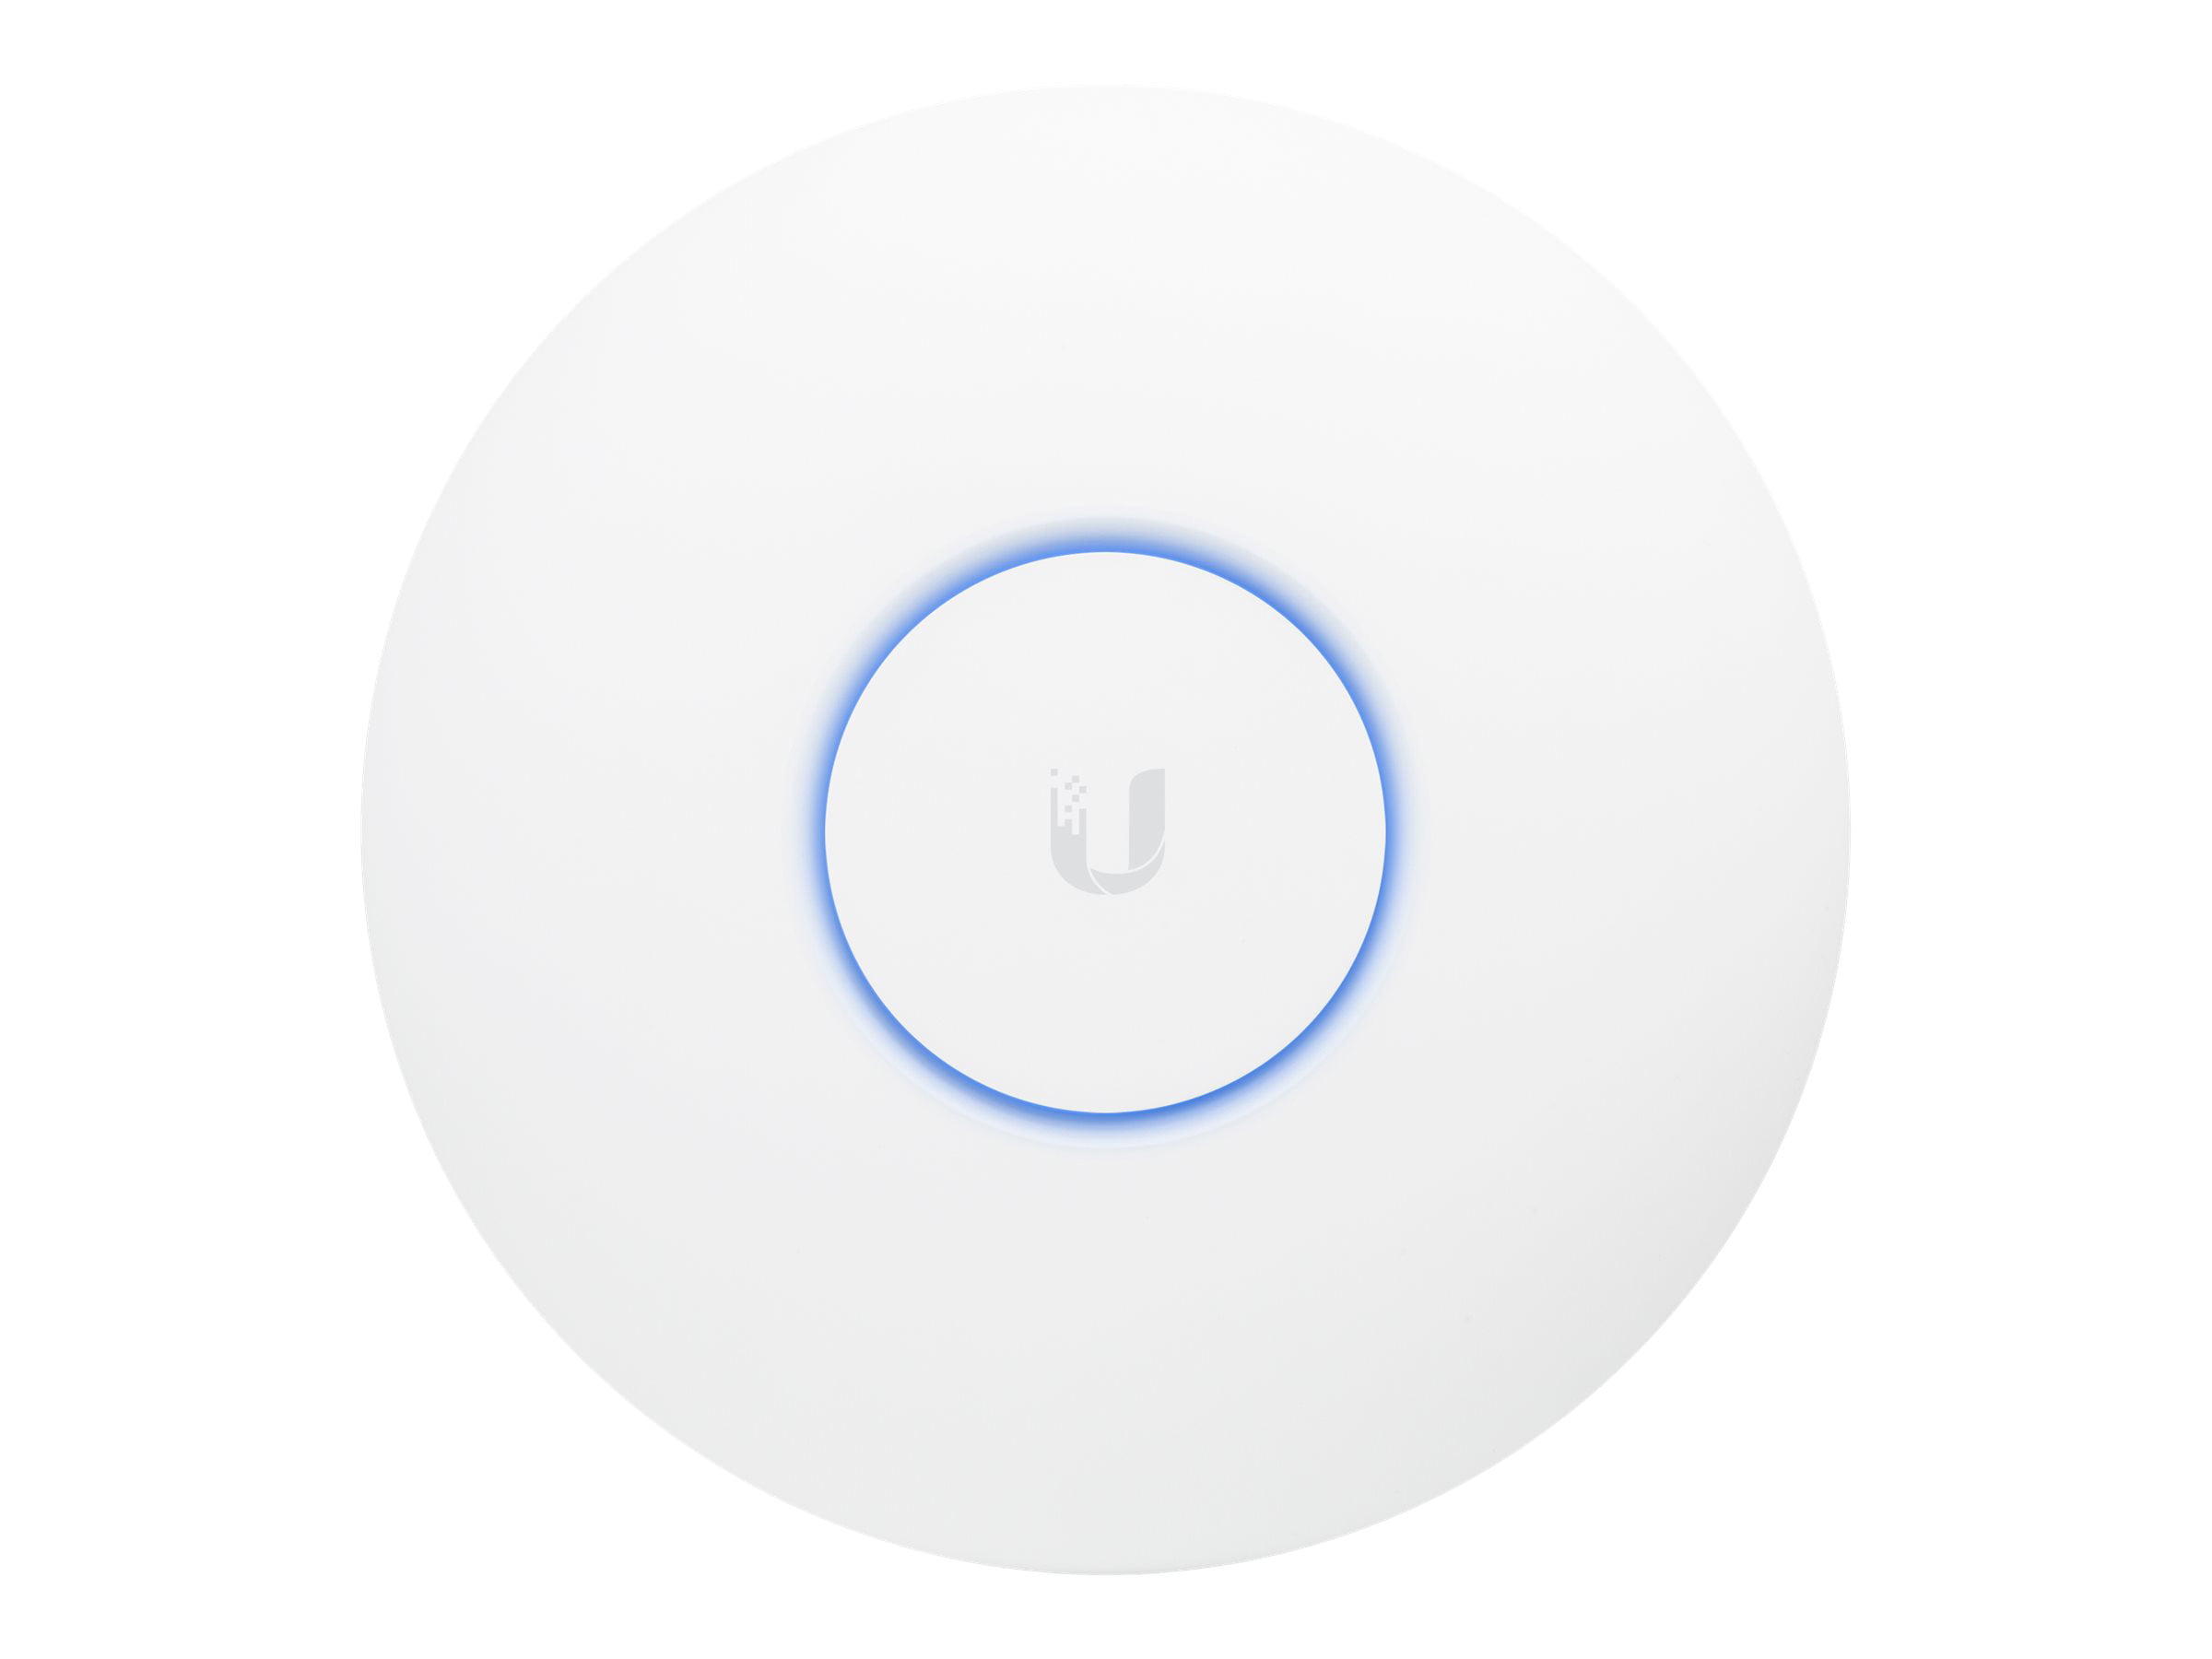 meget linned camouflage Ubiquiti UniFi AP-AC Pro - Wireless access point - Wi-Fi 5 - 2.4 GHz, 5 GHz  - DC power (pack of 3) - Walmart.com